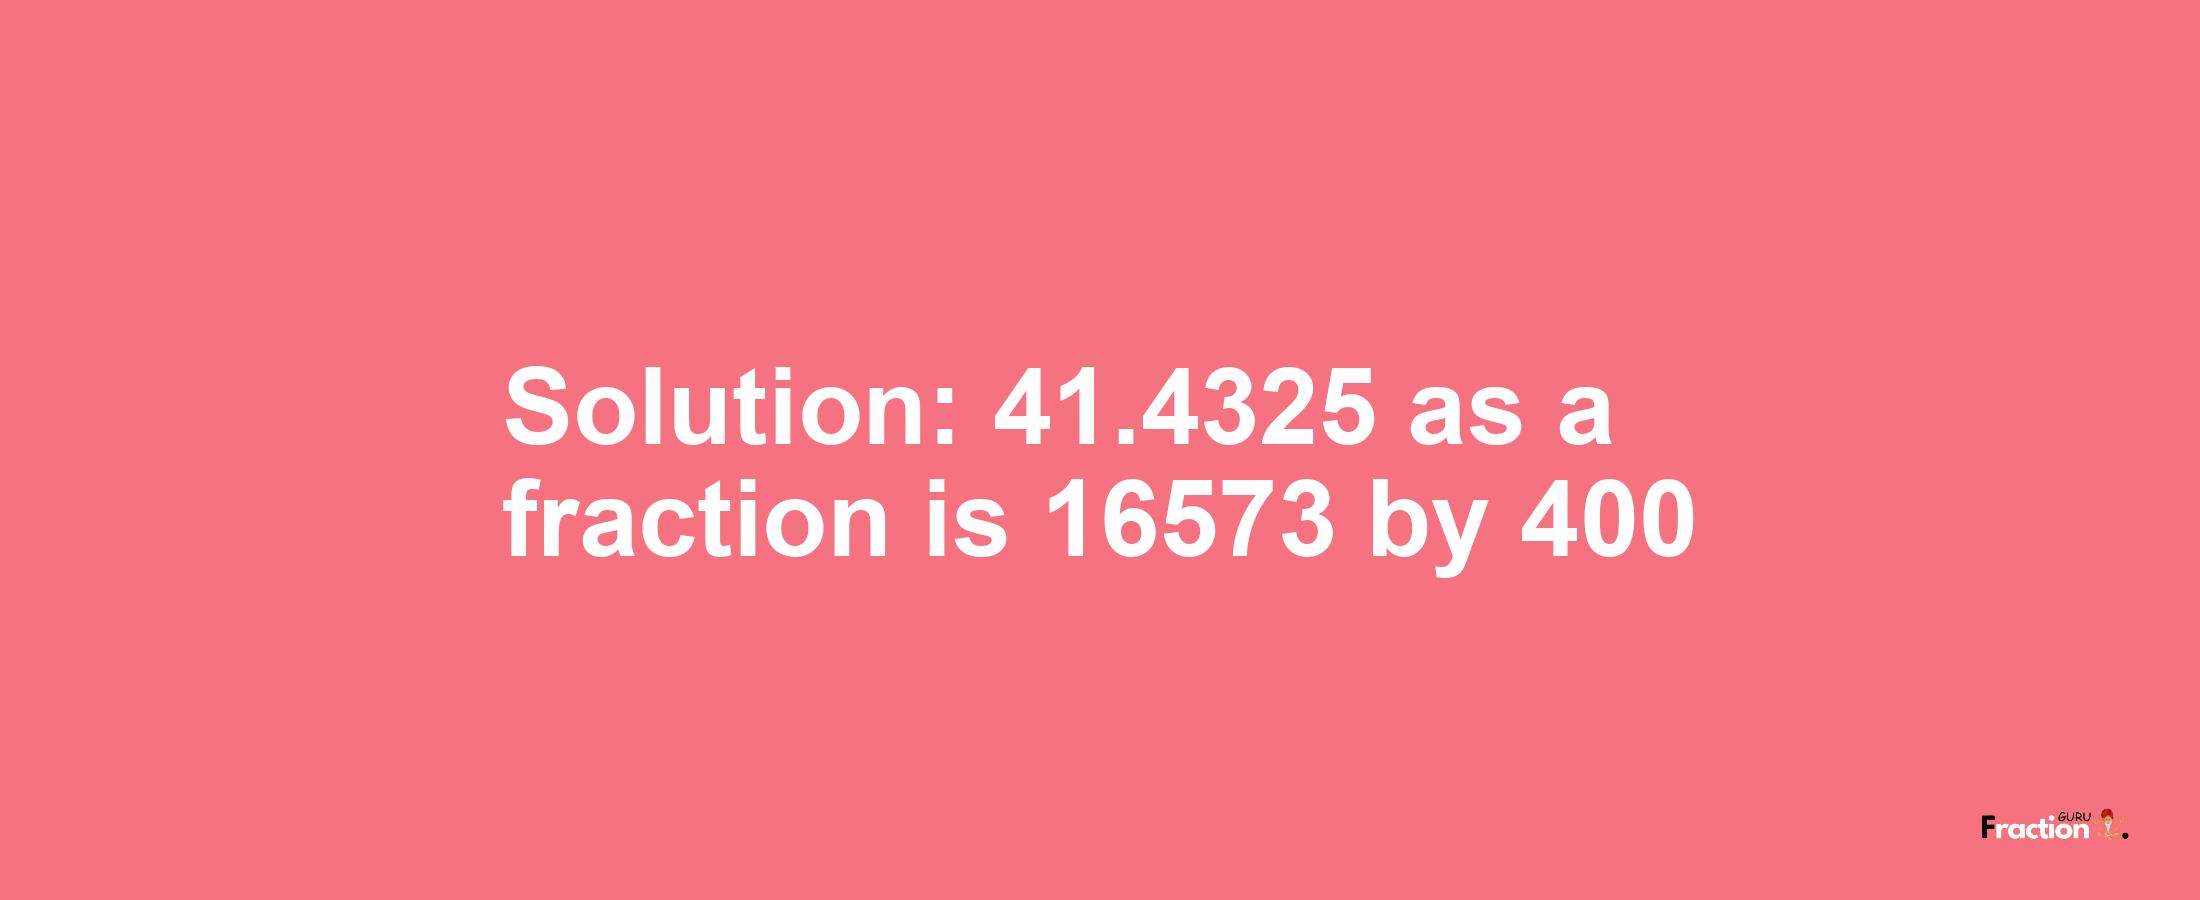 Solution:41.4325 as a fraction is 16573/400